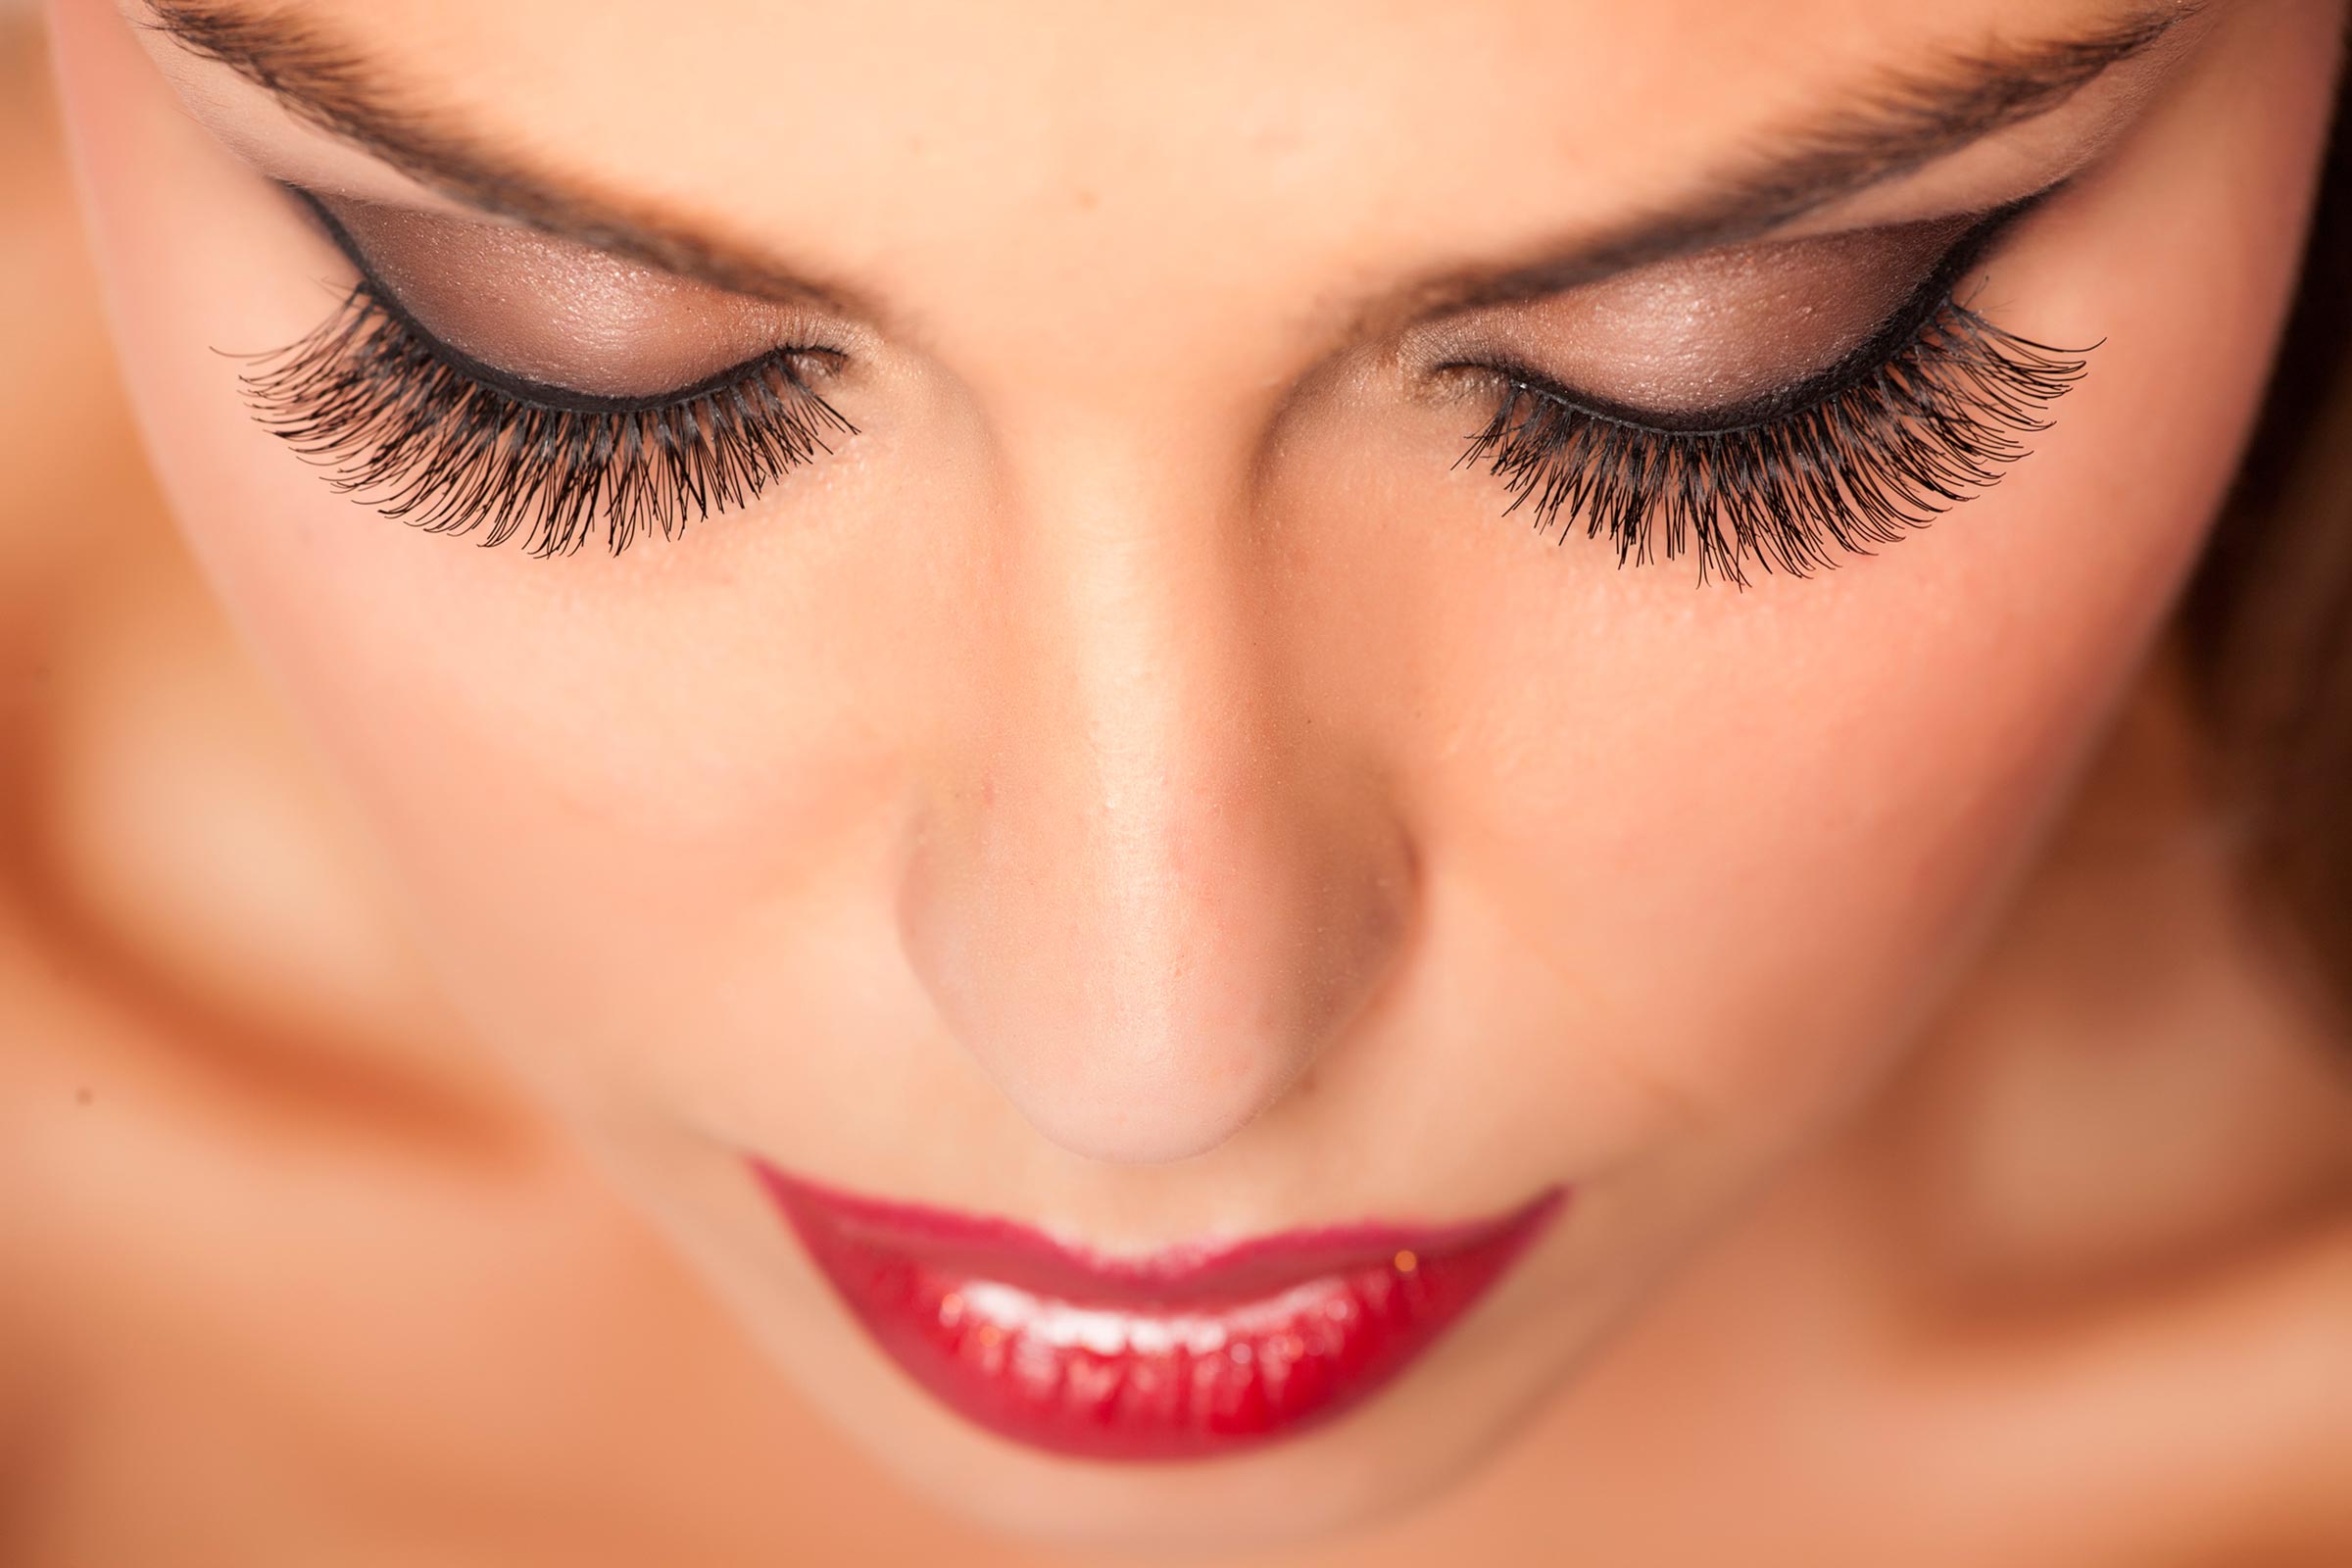 10 Things You Need To Know Before Trying Eyelash Extensions